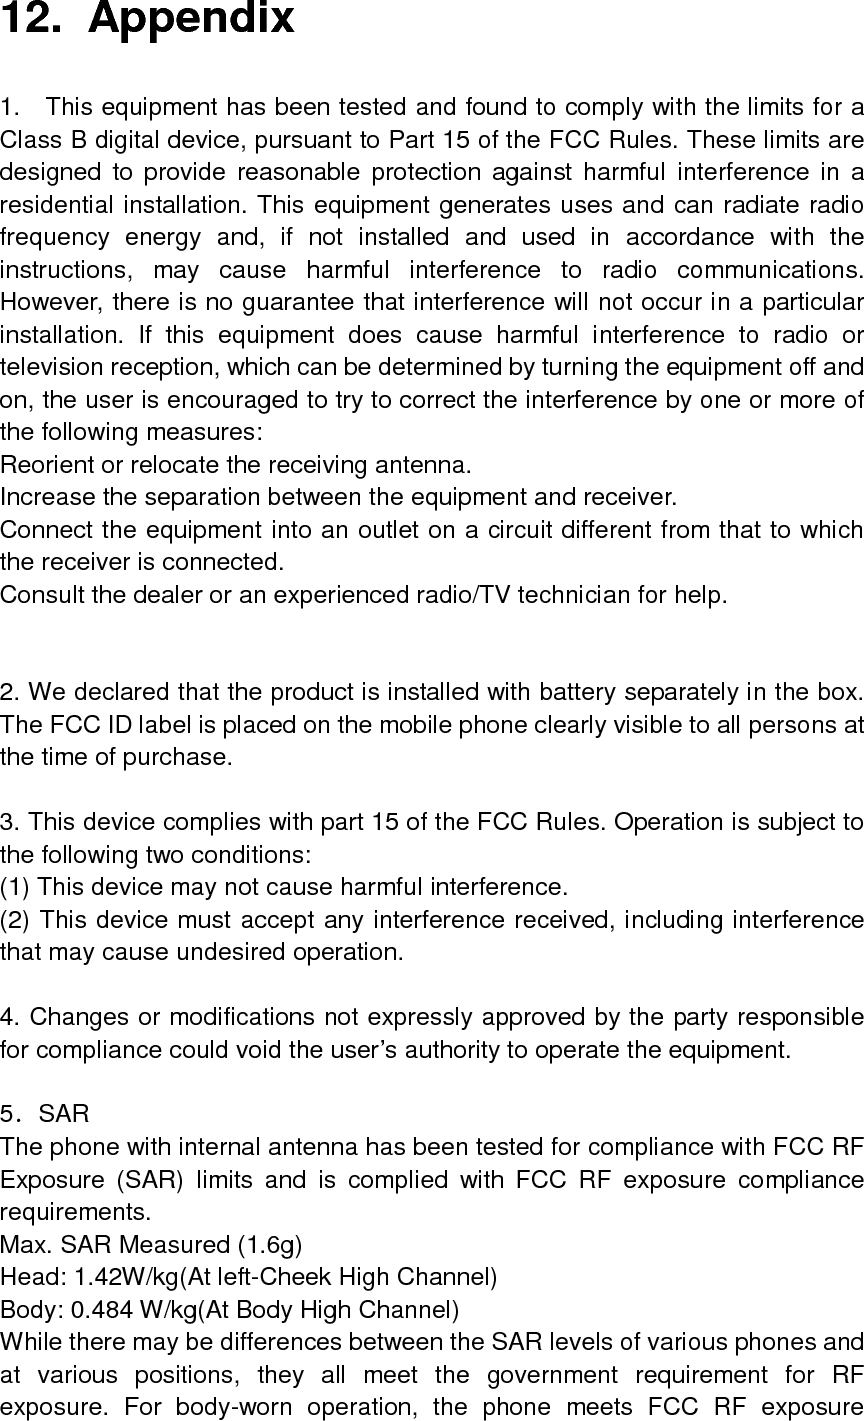  guidelines provided that it is used with a non-metallic accessory with the handset at least 1.5 cm from the body. Use of other accessories may not ensure compliance with FCC RF exposure guidelines.  